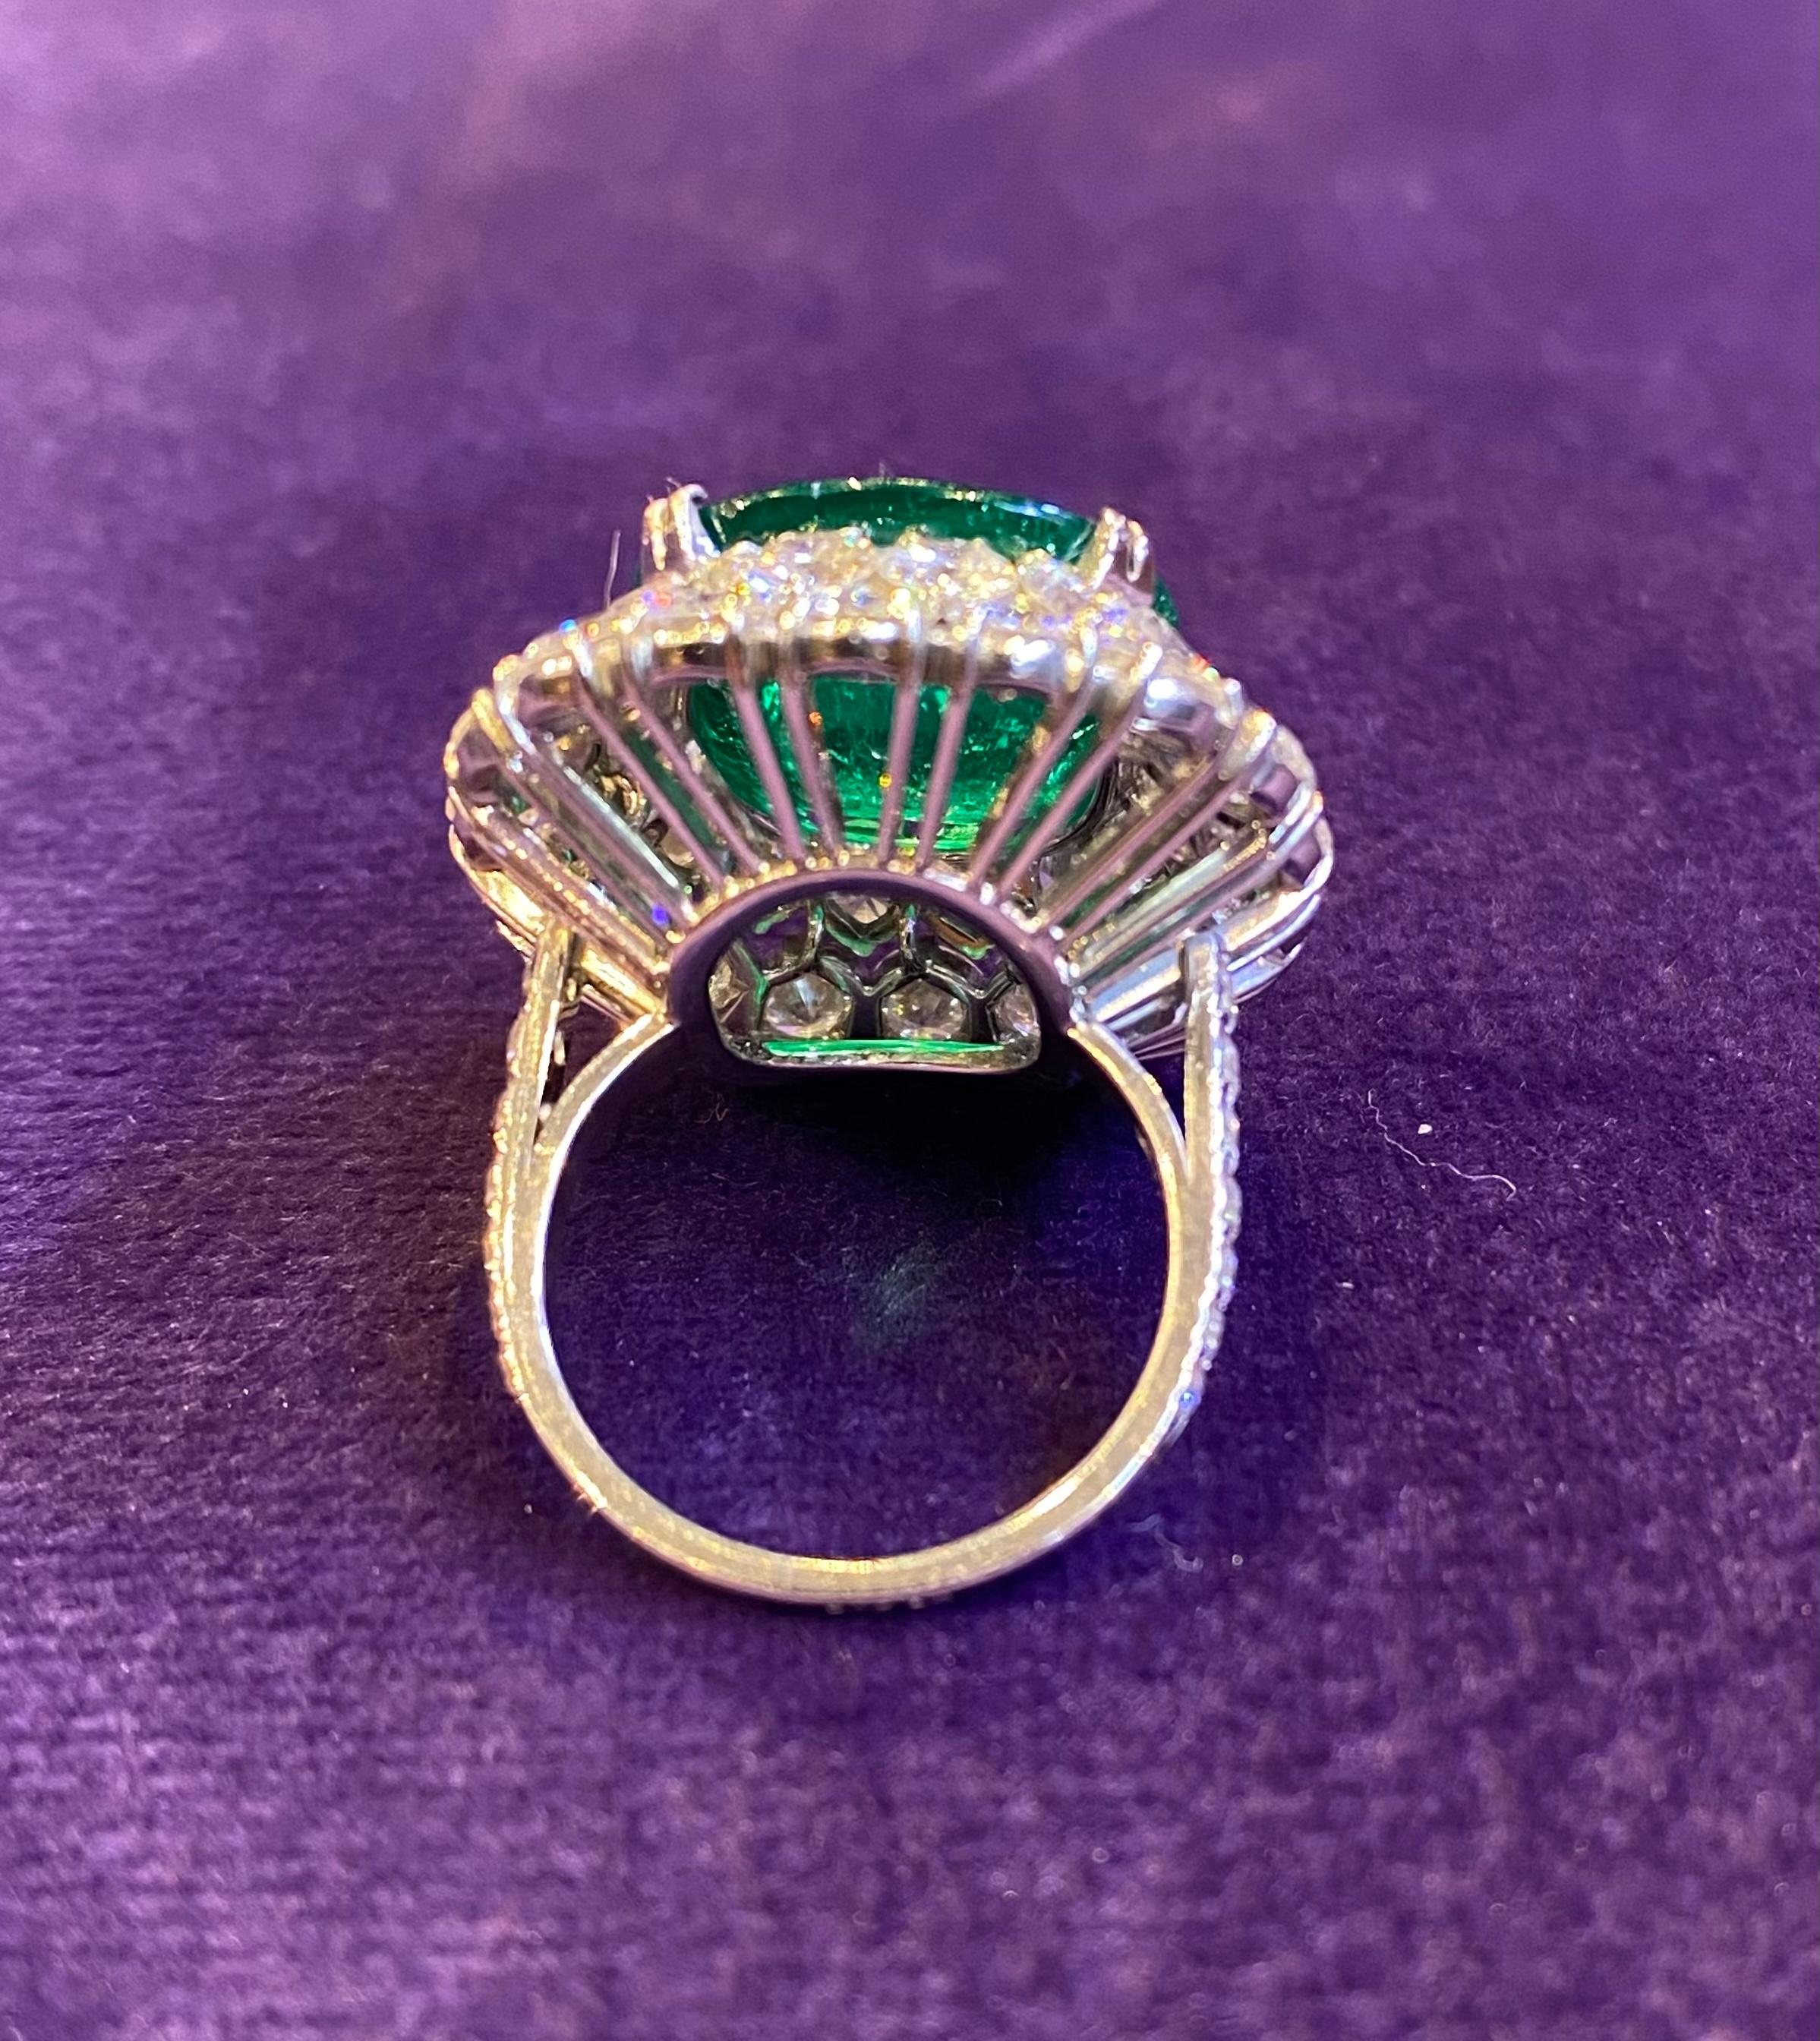 10.64 Carat Certified Colombian Emerald Ring by Bvlgari For Sale 2